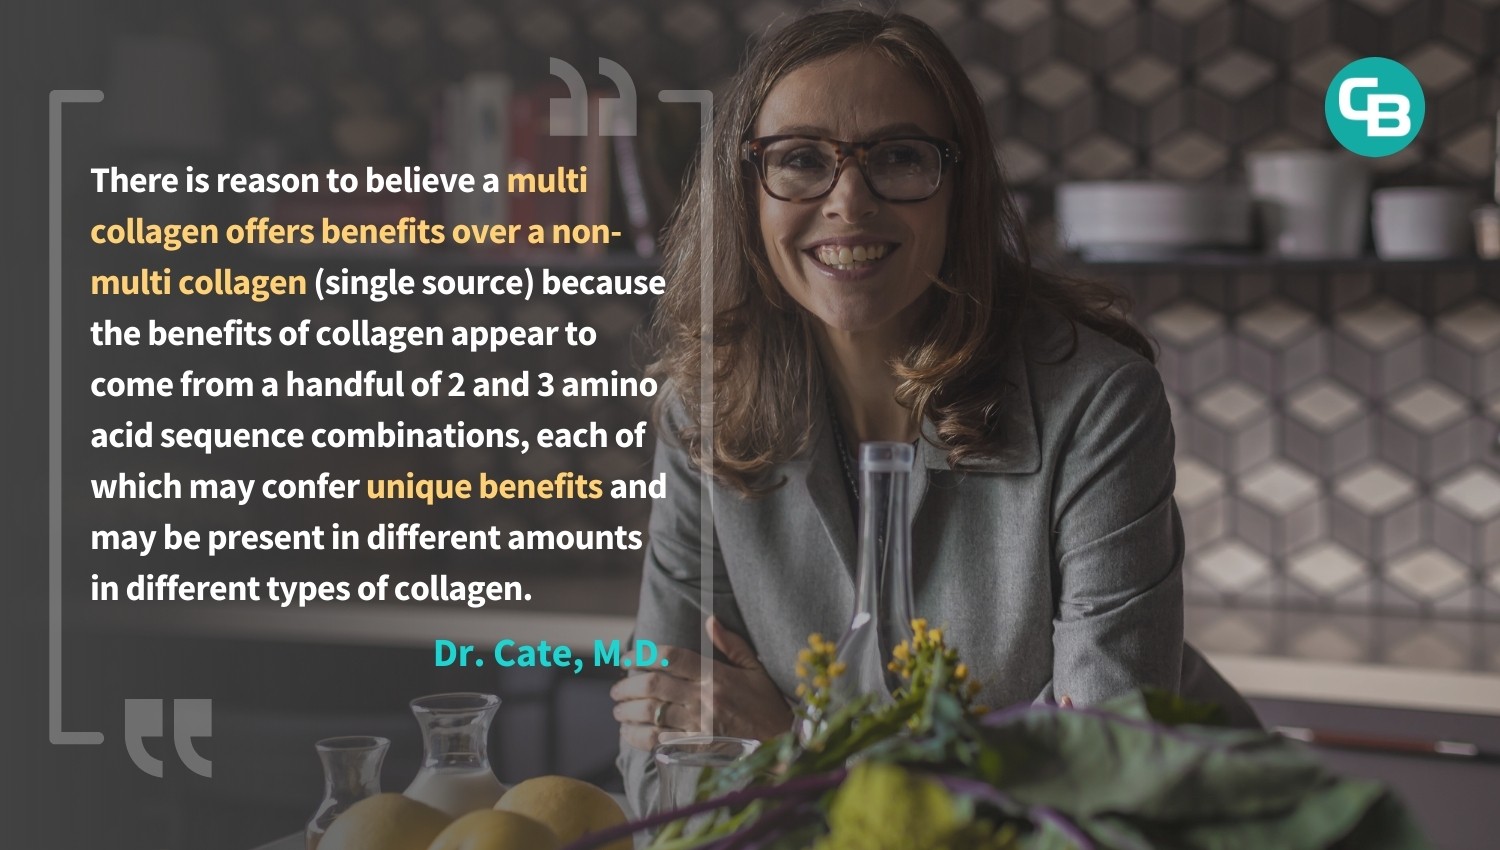 Multi Collagen Benefits over Single Source Quote from Dr. Cate